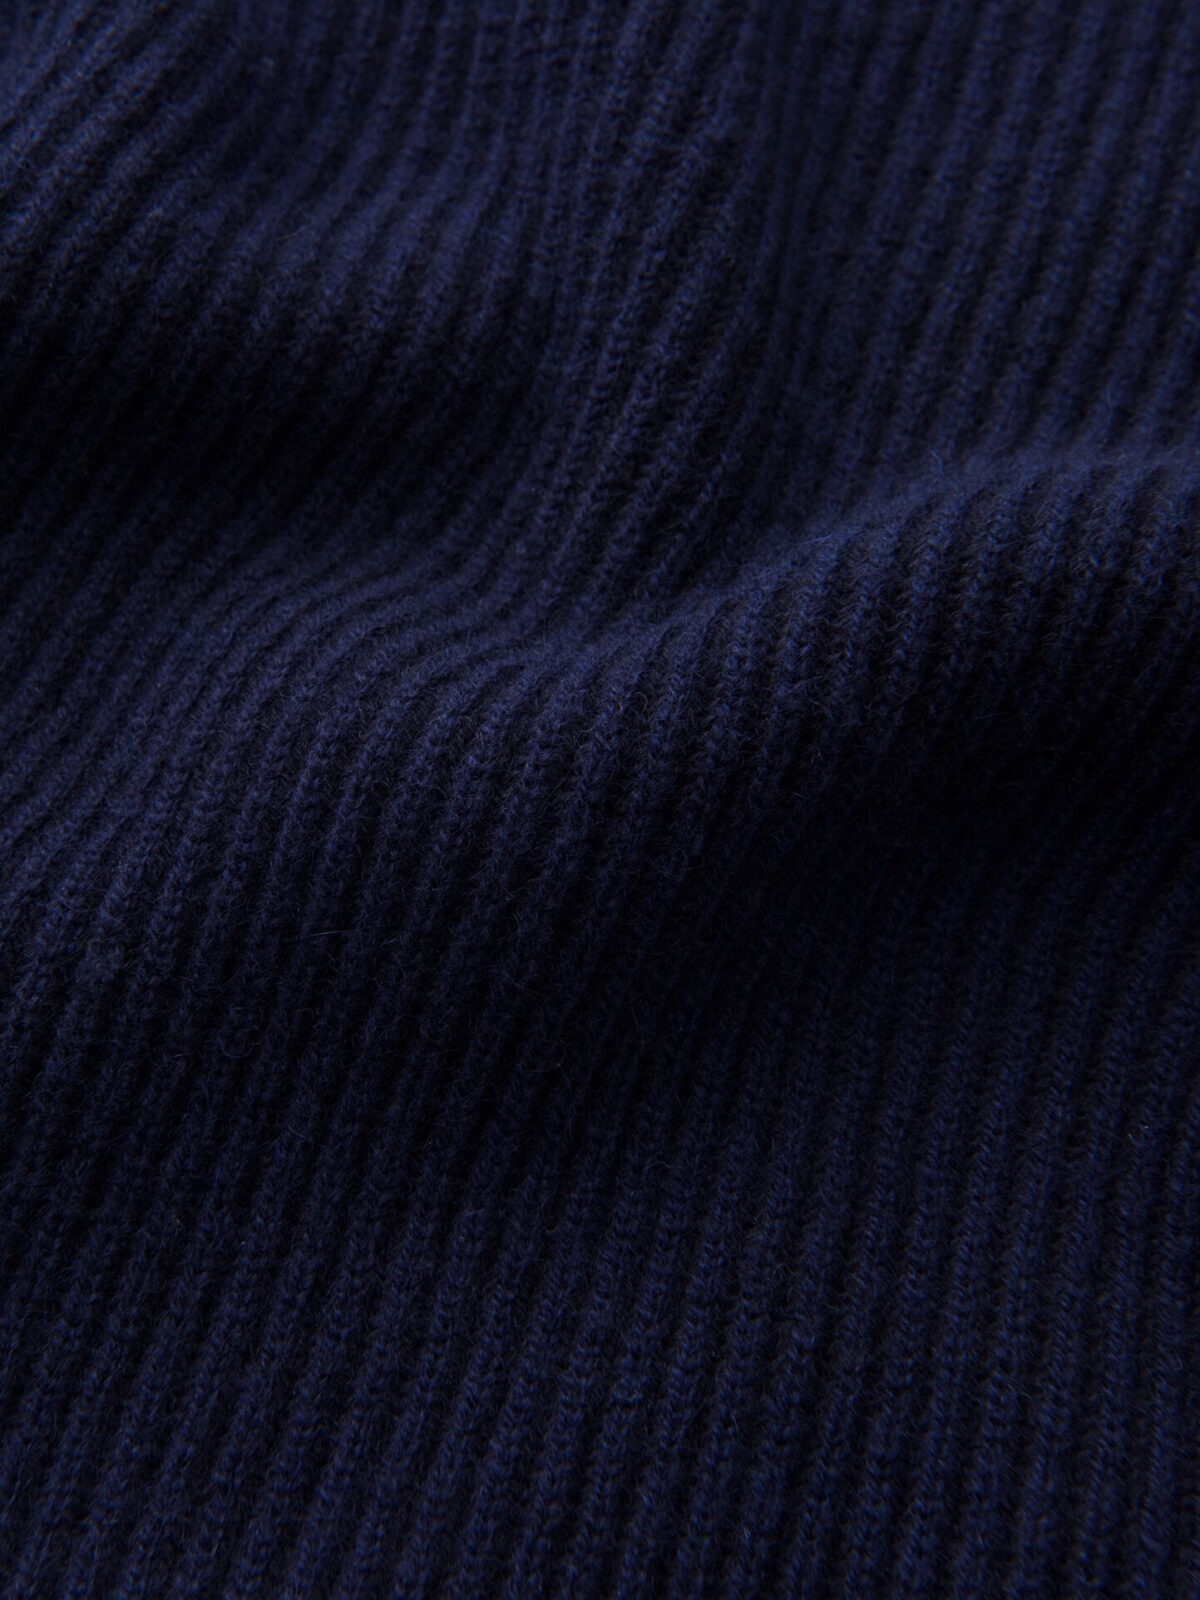 Navy Ribbed Cotton and Cashmere Rollneck Sweater by Proper Cloth